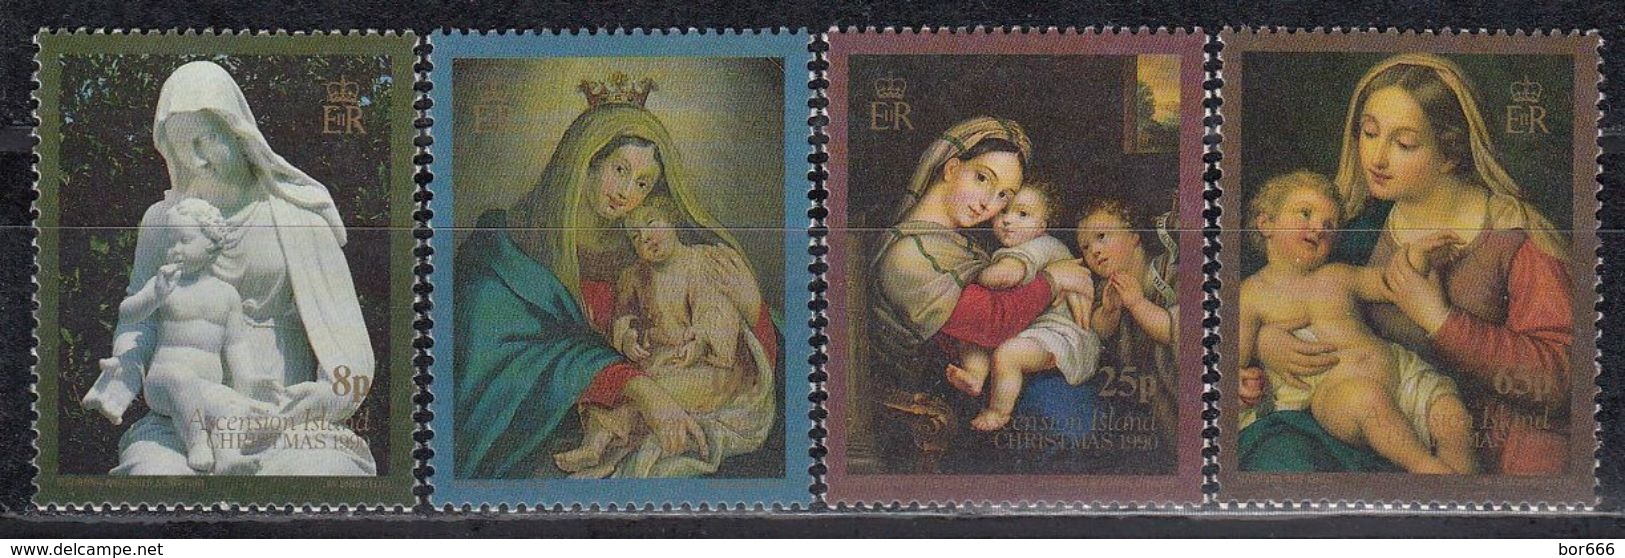 Ascension - CHRISTMAS 1990 MNH - Ascension